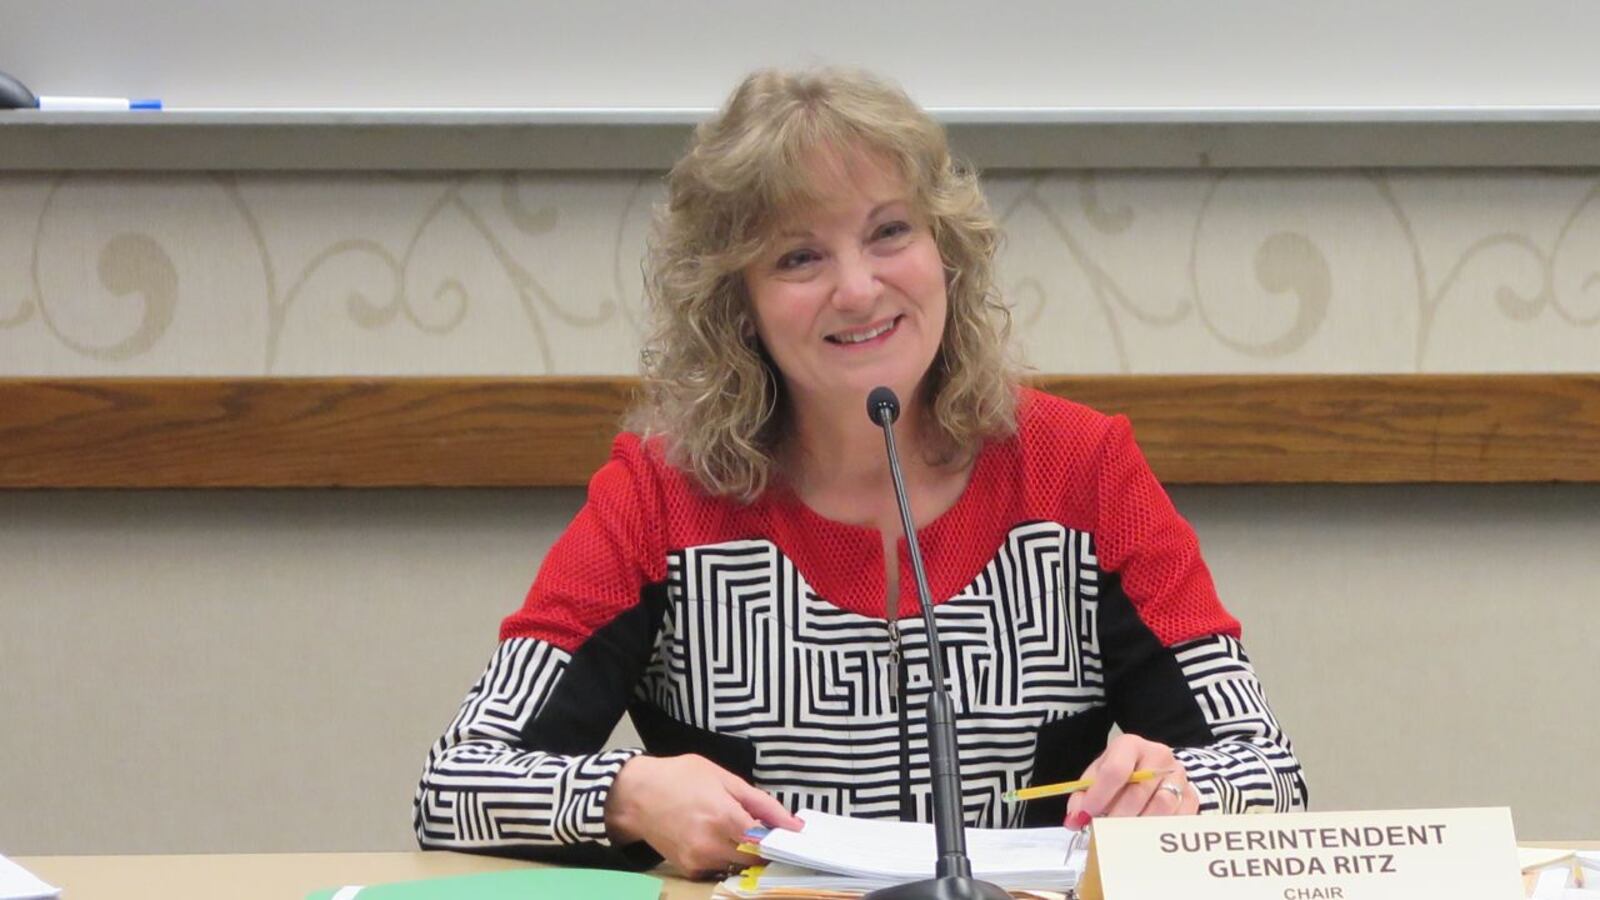 State Superintendent Glenda Ritz at a meeting of the Indiana State Board of Education earlier this month.